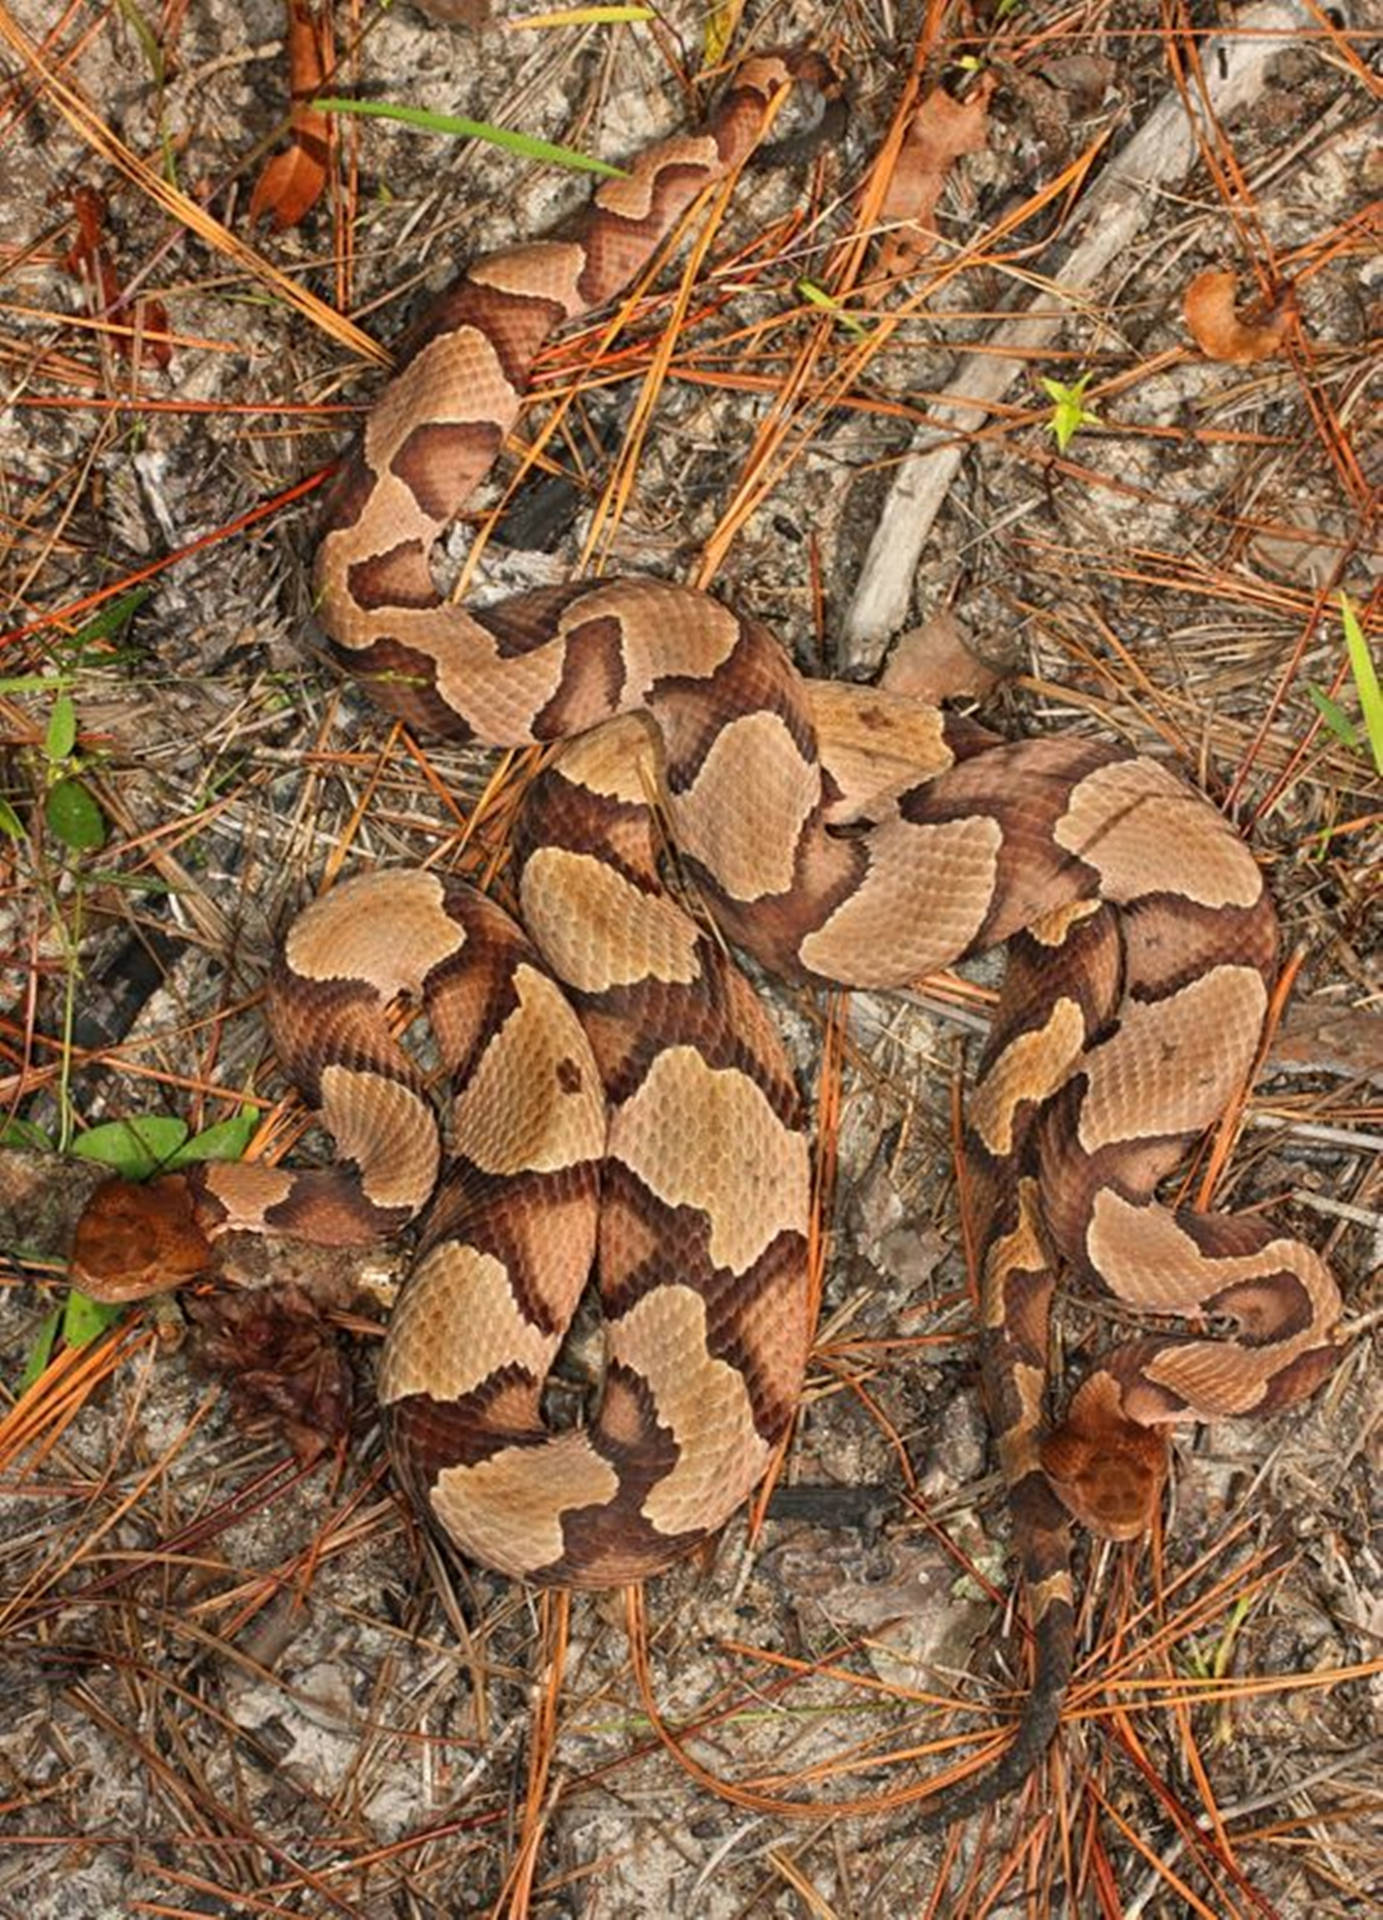 Copperhead Snakes Camouflaging On Forest Floor Wallpaper